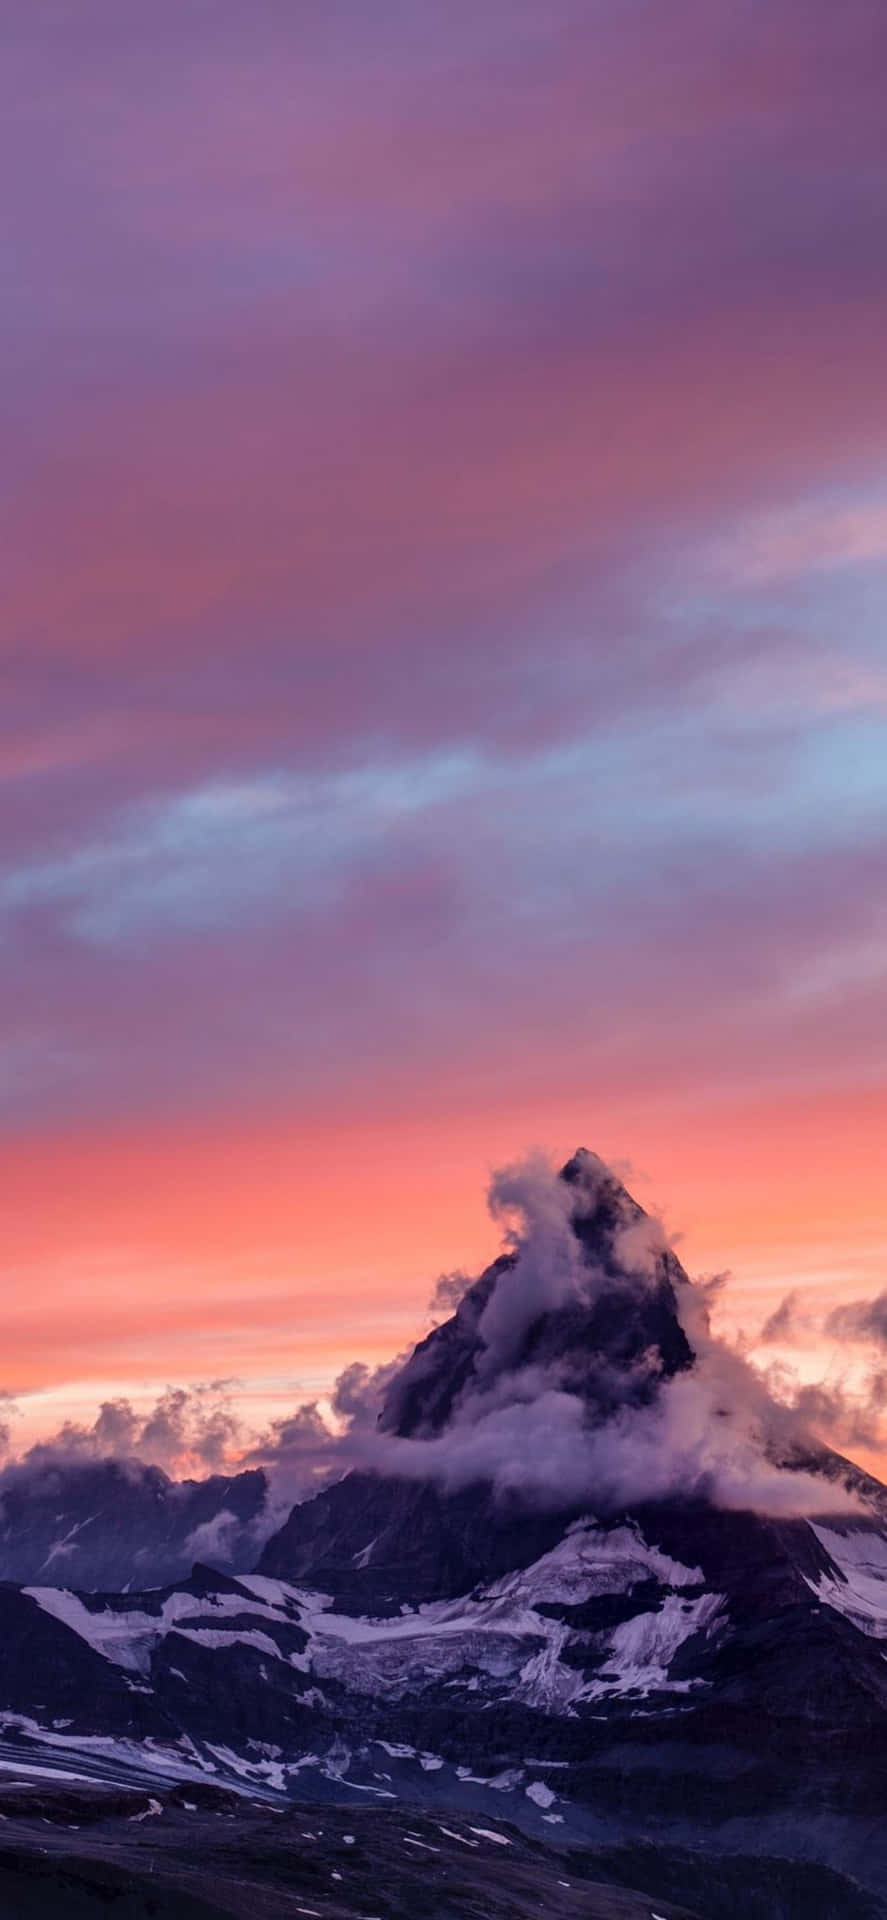 Majestic Mountain Landscape on an iPhone Background